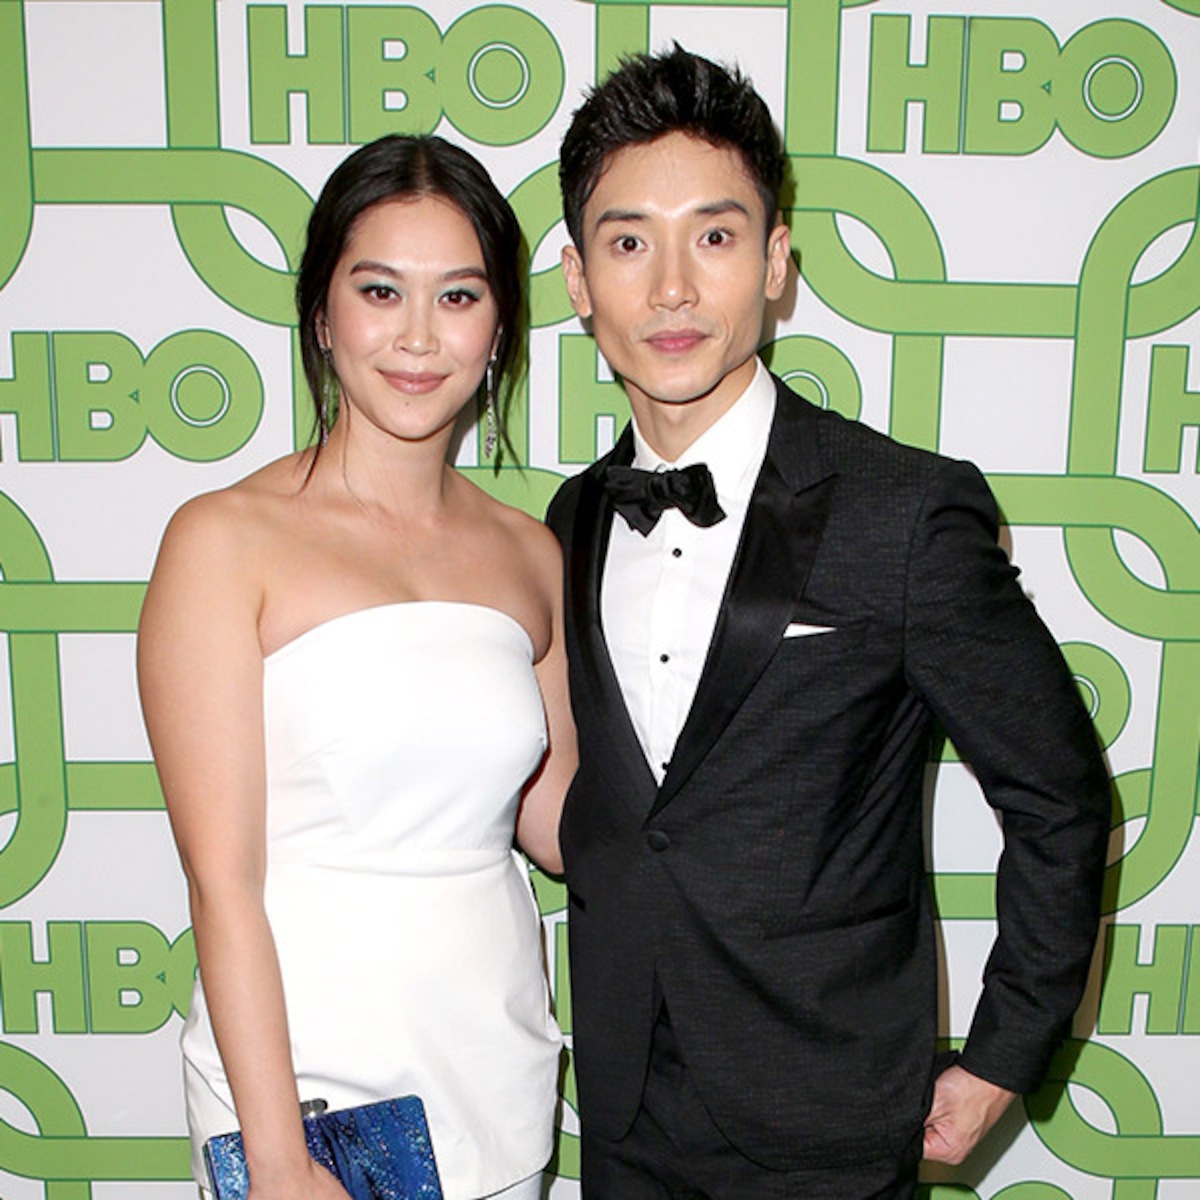 The Good Place's Manny Jacinto Is Engaged to Dianne Doan - E! Online